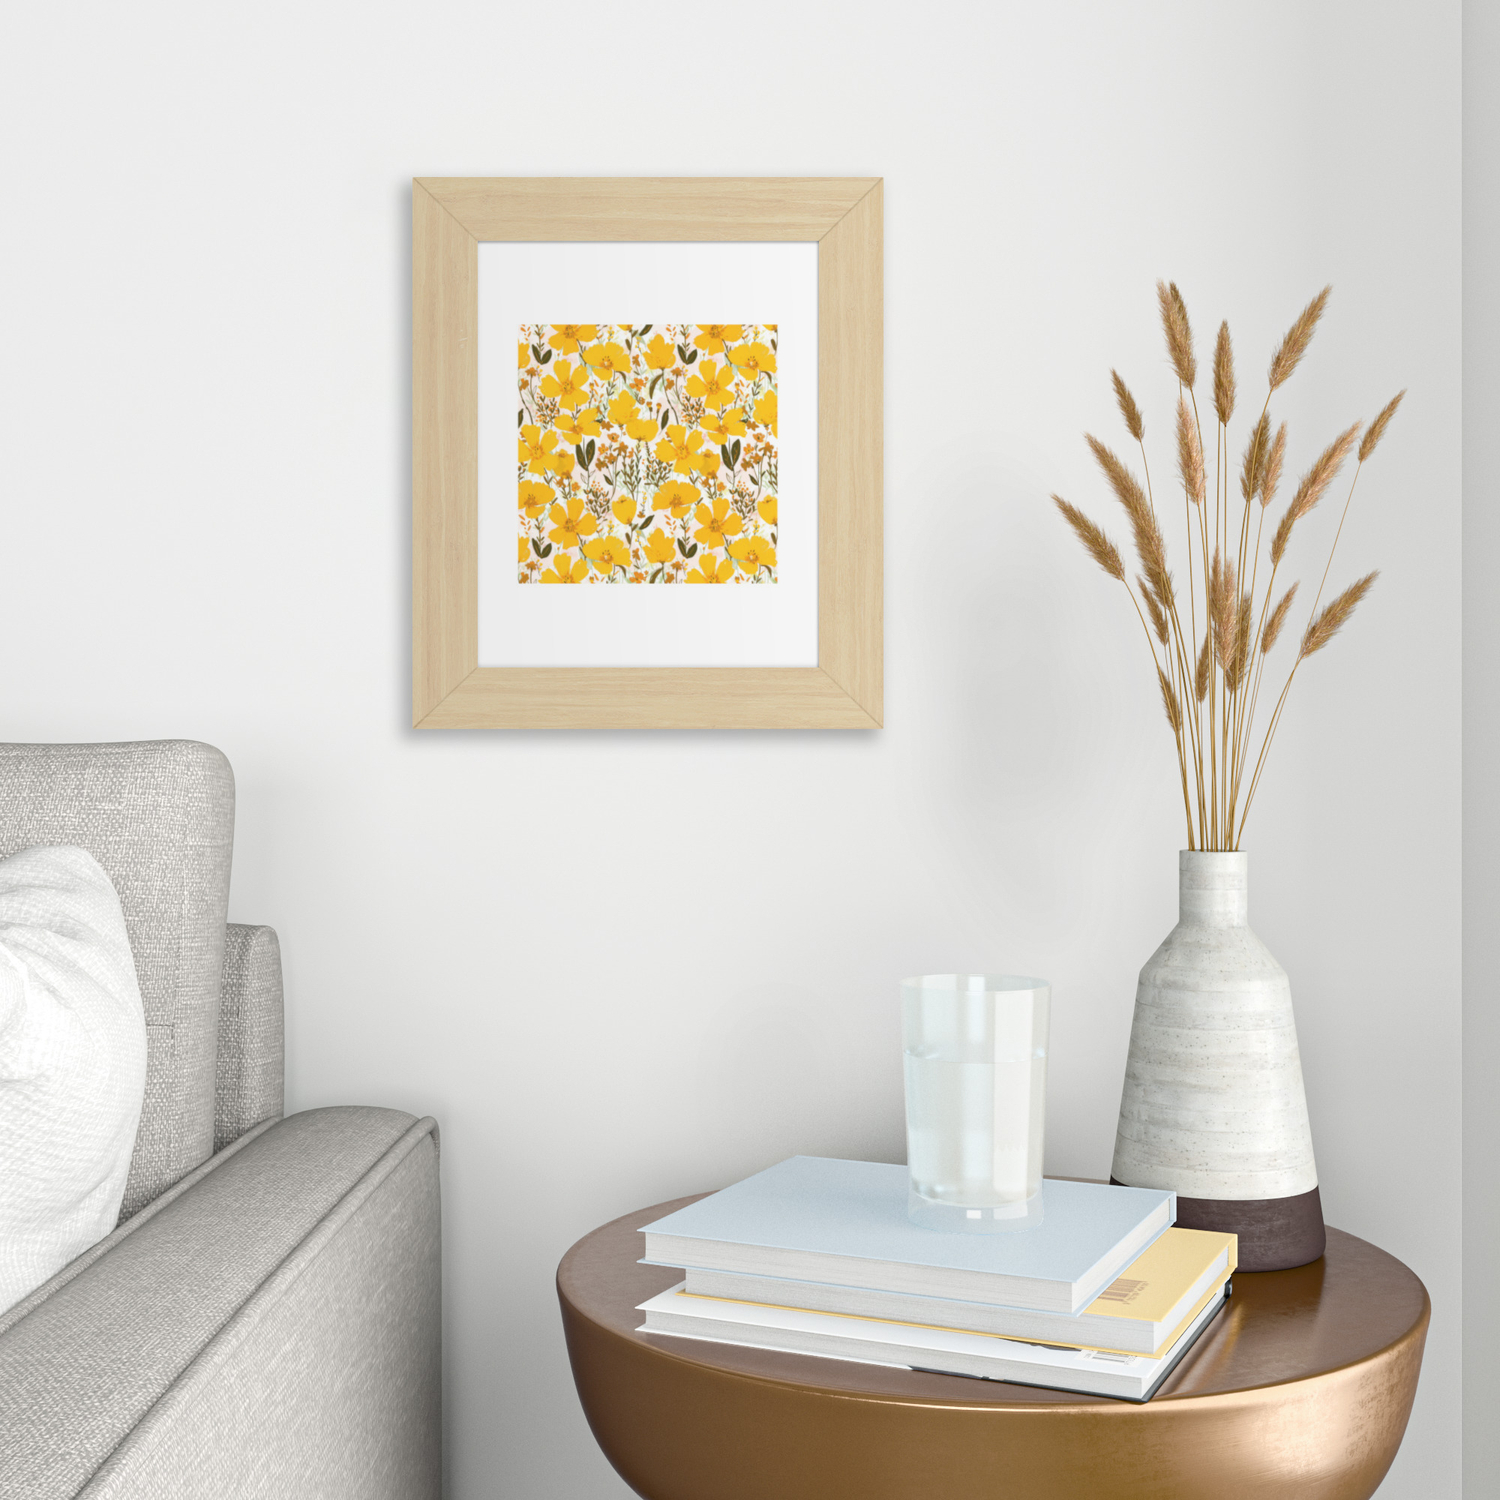 X-Large 28 x 20 Society6 Yellow Roaming Wildflowers by Alison Janssen on Rectangular Pillow 